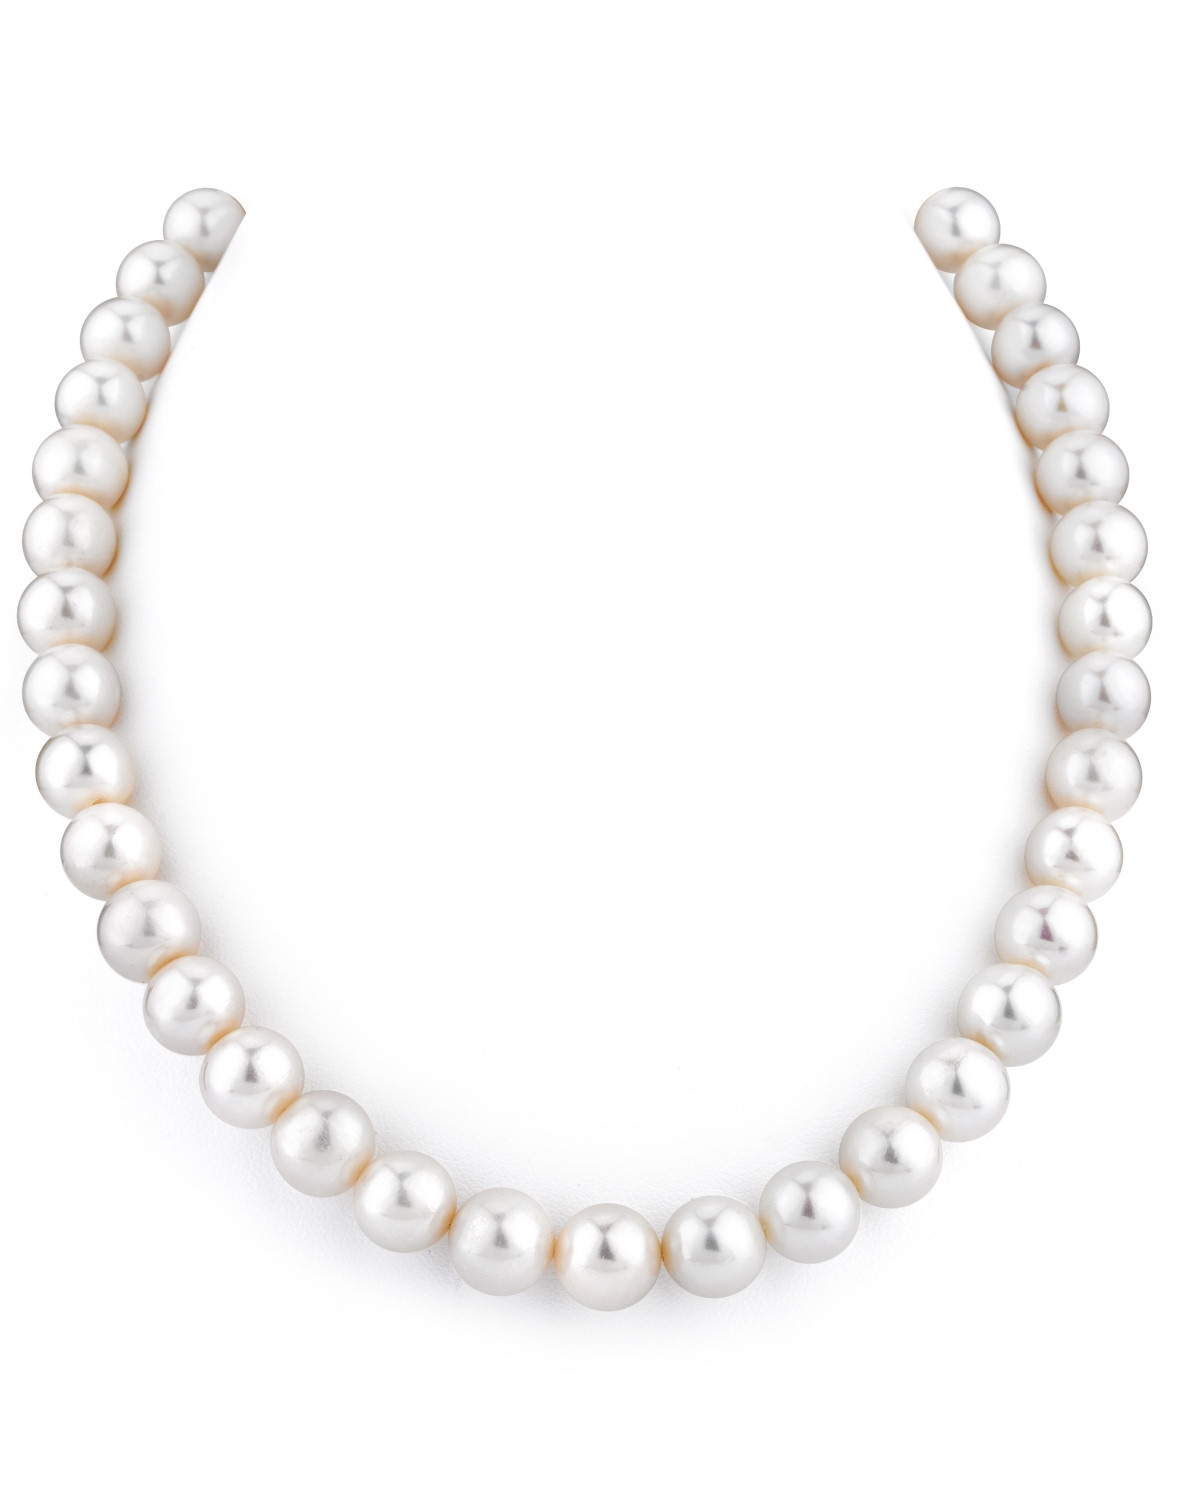 Pearl Necklace Png , (+) Pictures.